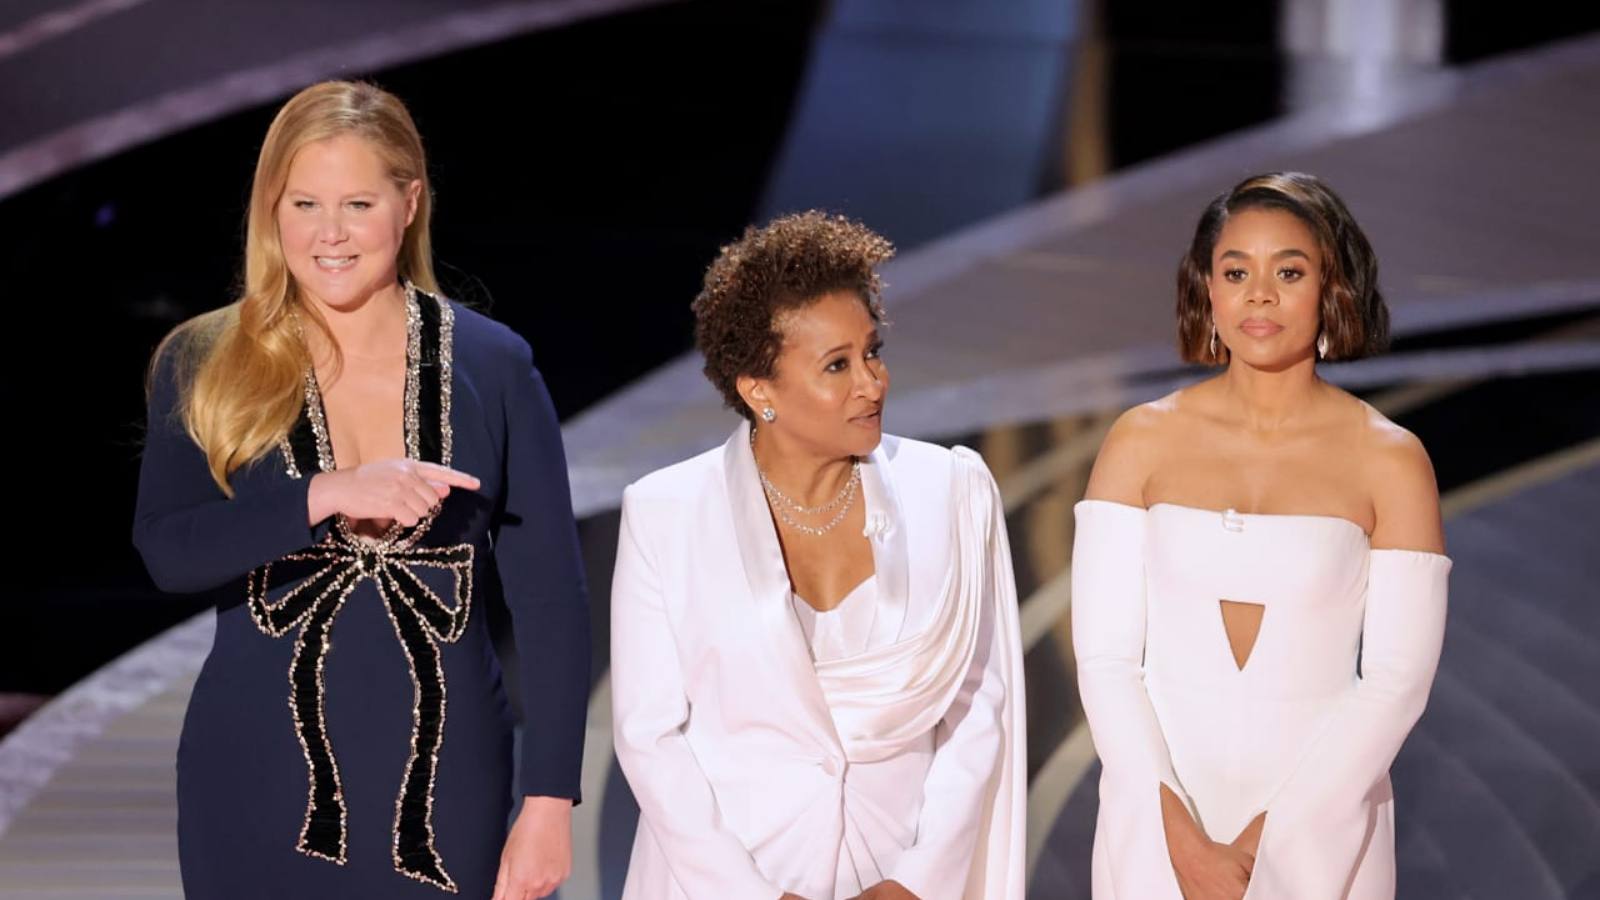 Wanda Skyes along with co-hosts Amy Schumer and Regina Halls at the Oscar stage